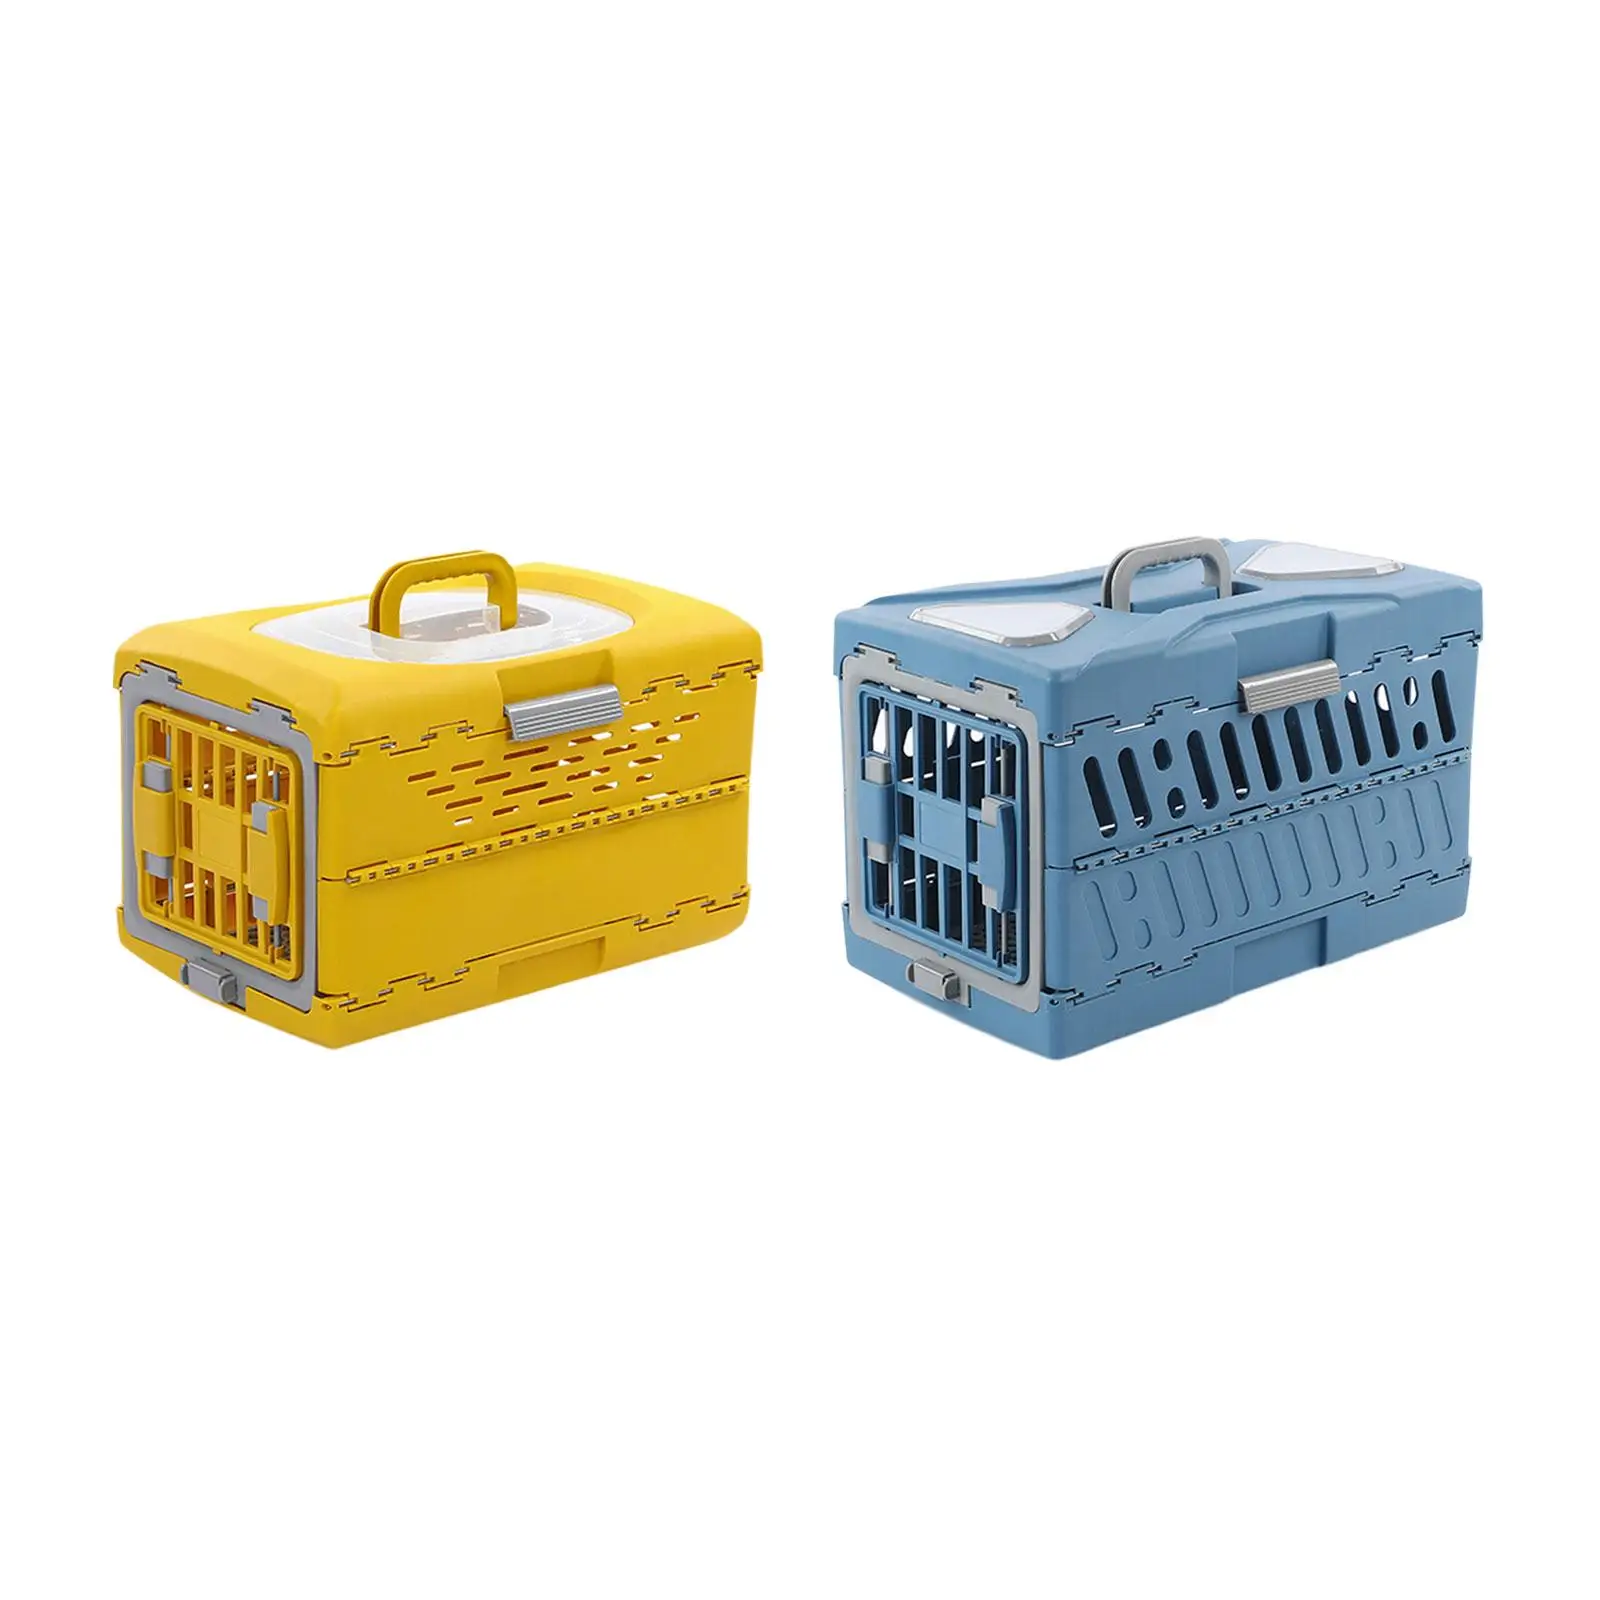 Collapsible Puppy Crate Cat Travel Cage Breathable Hard Sided Foldable Heavy